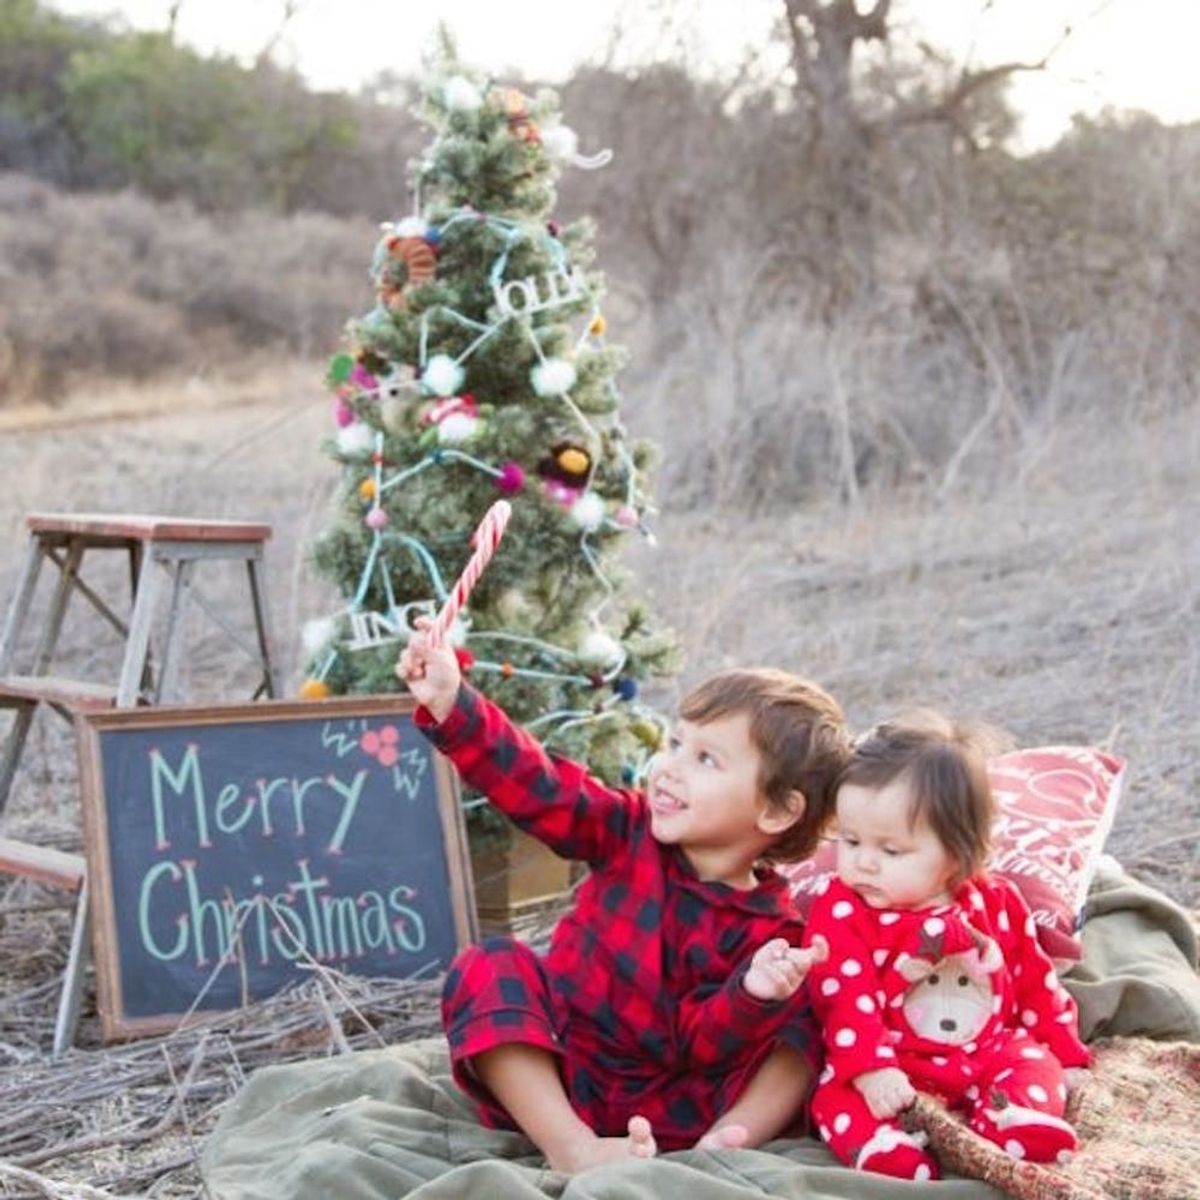 12 Outdoor Family Holiday Card Ideas That Aren’t a Tree Farm